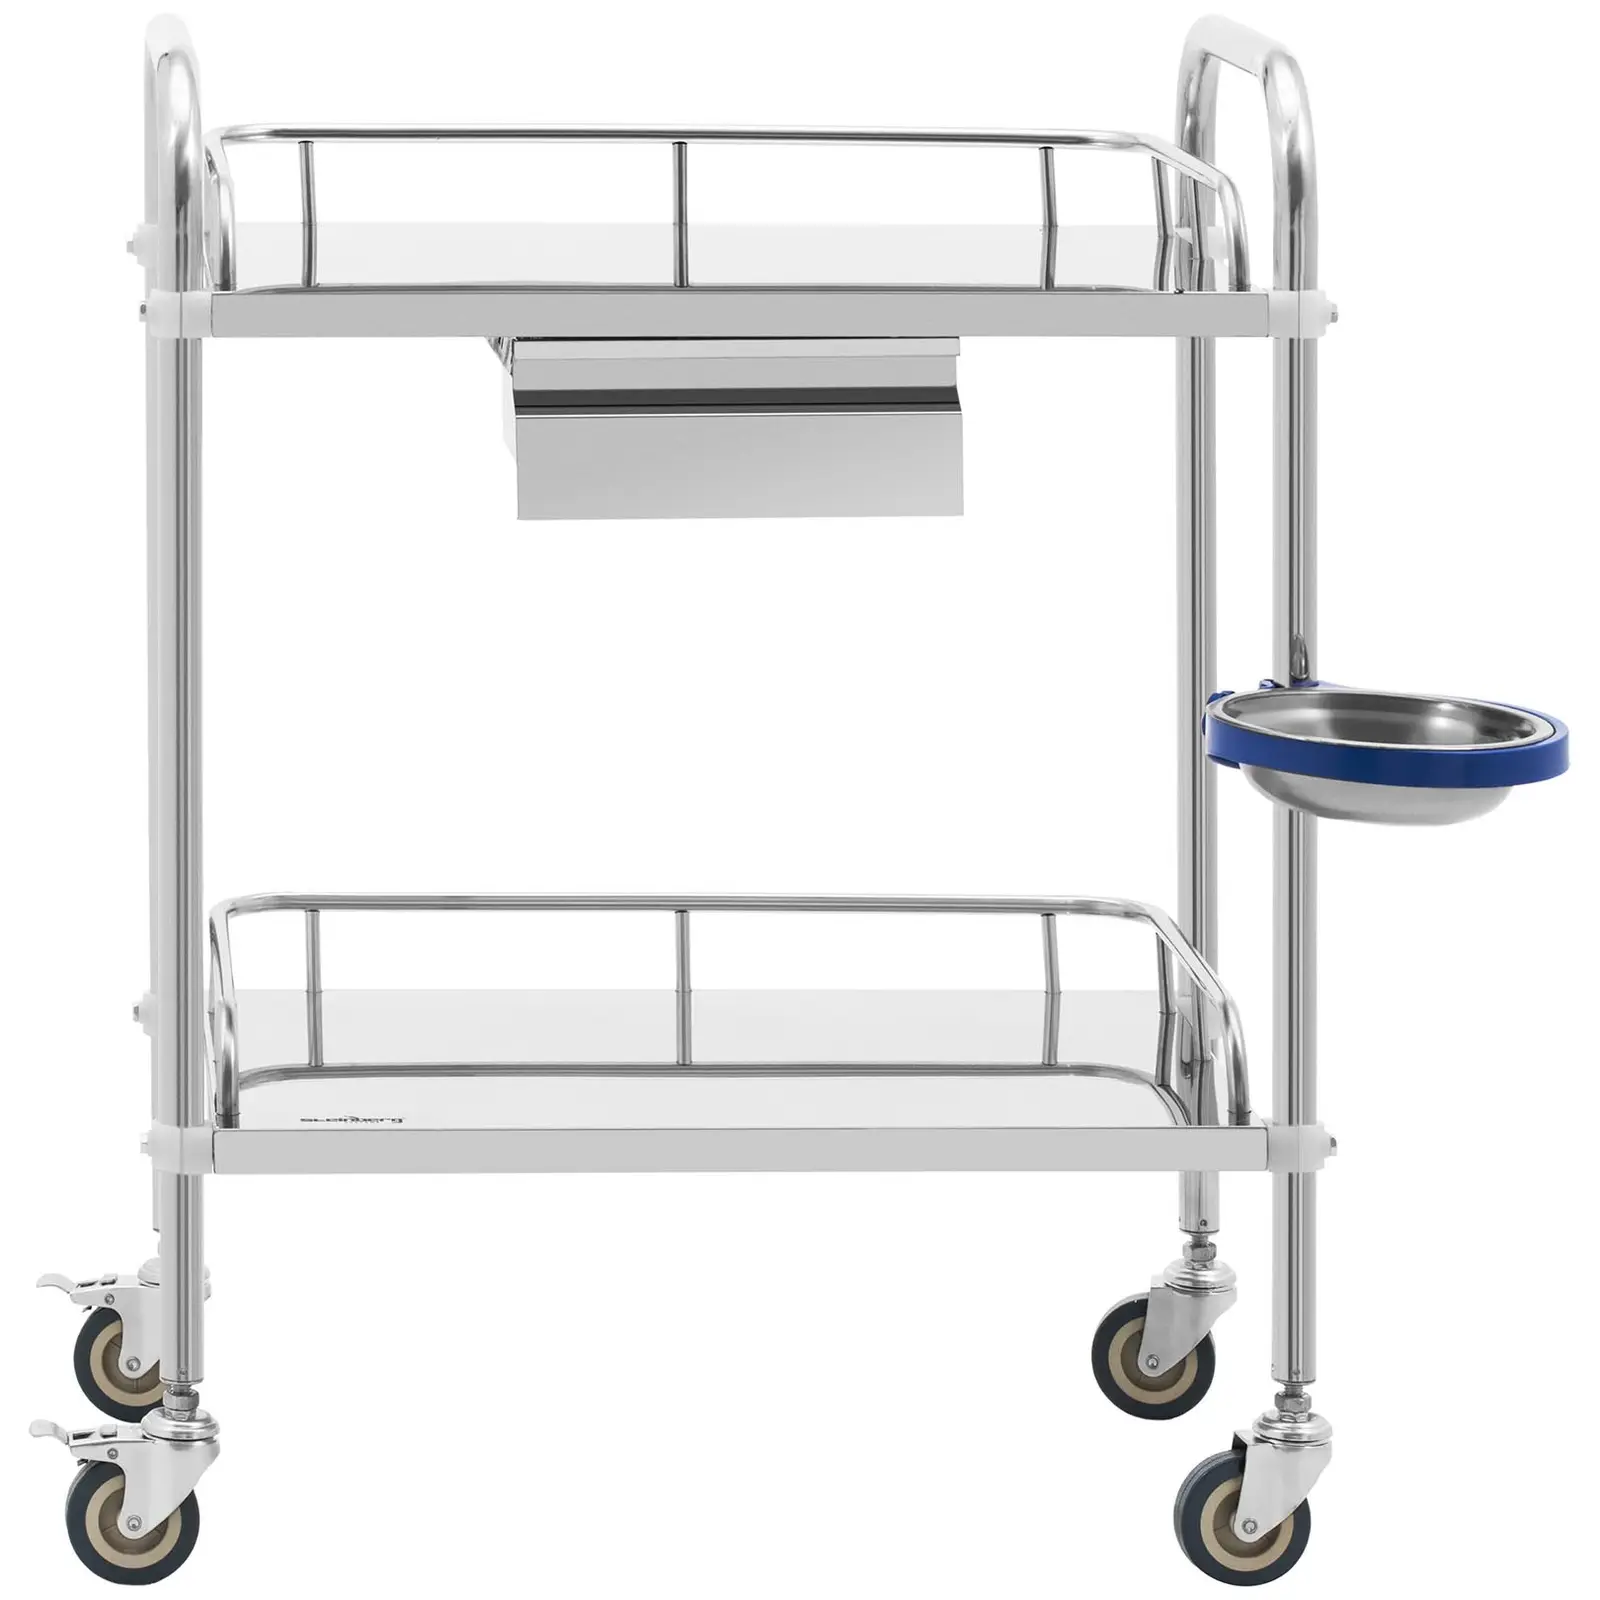 Laboratory Trolley - stainless steel - 2 shelves each 54 x 37 x 13 cm - 1 drawer - 20 kg